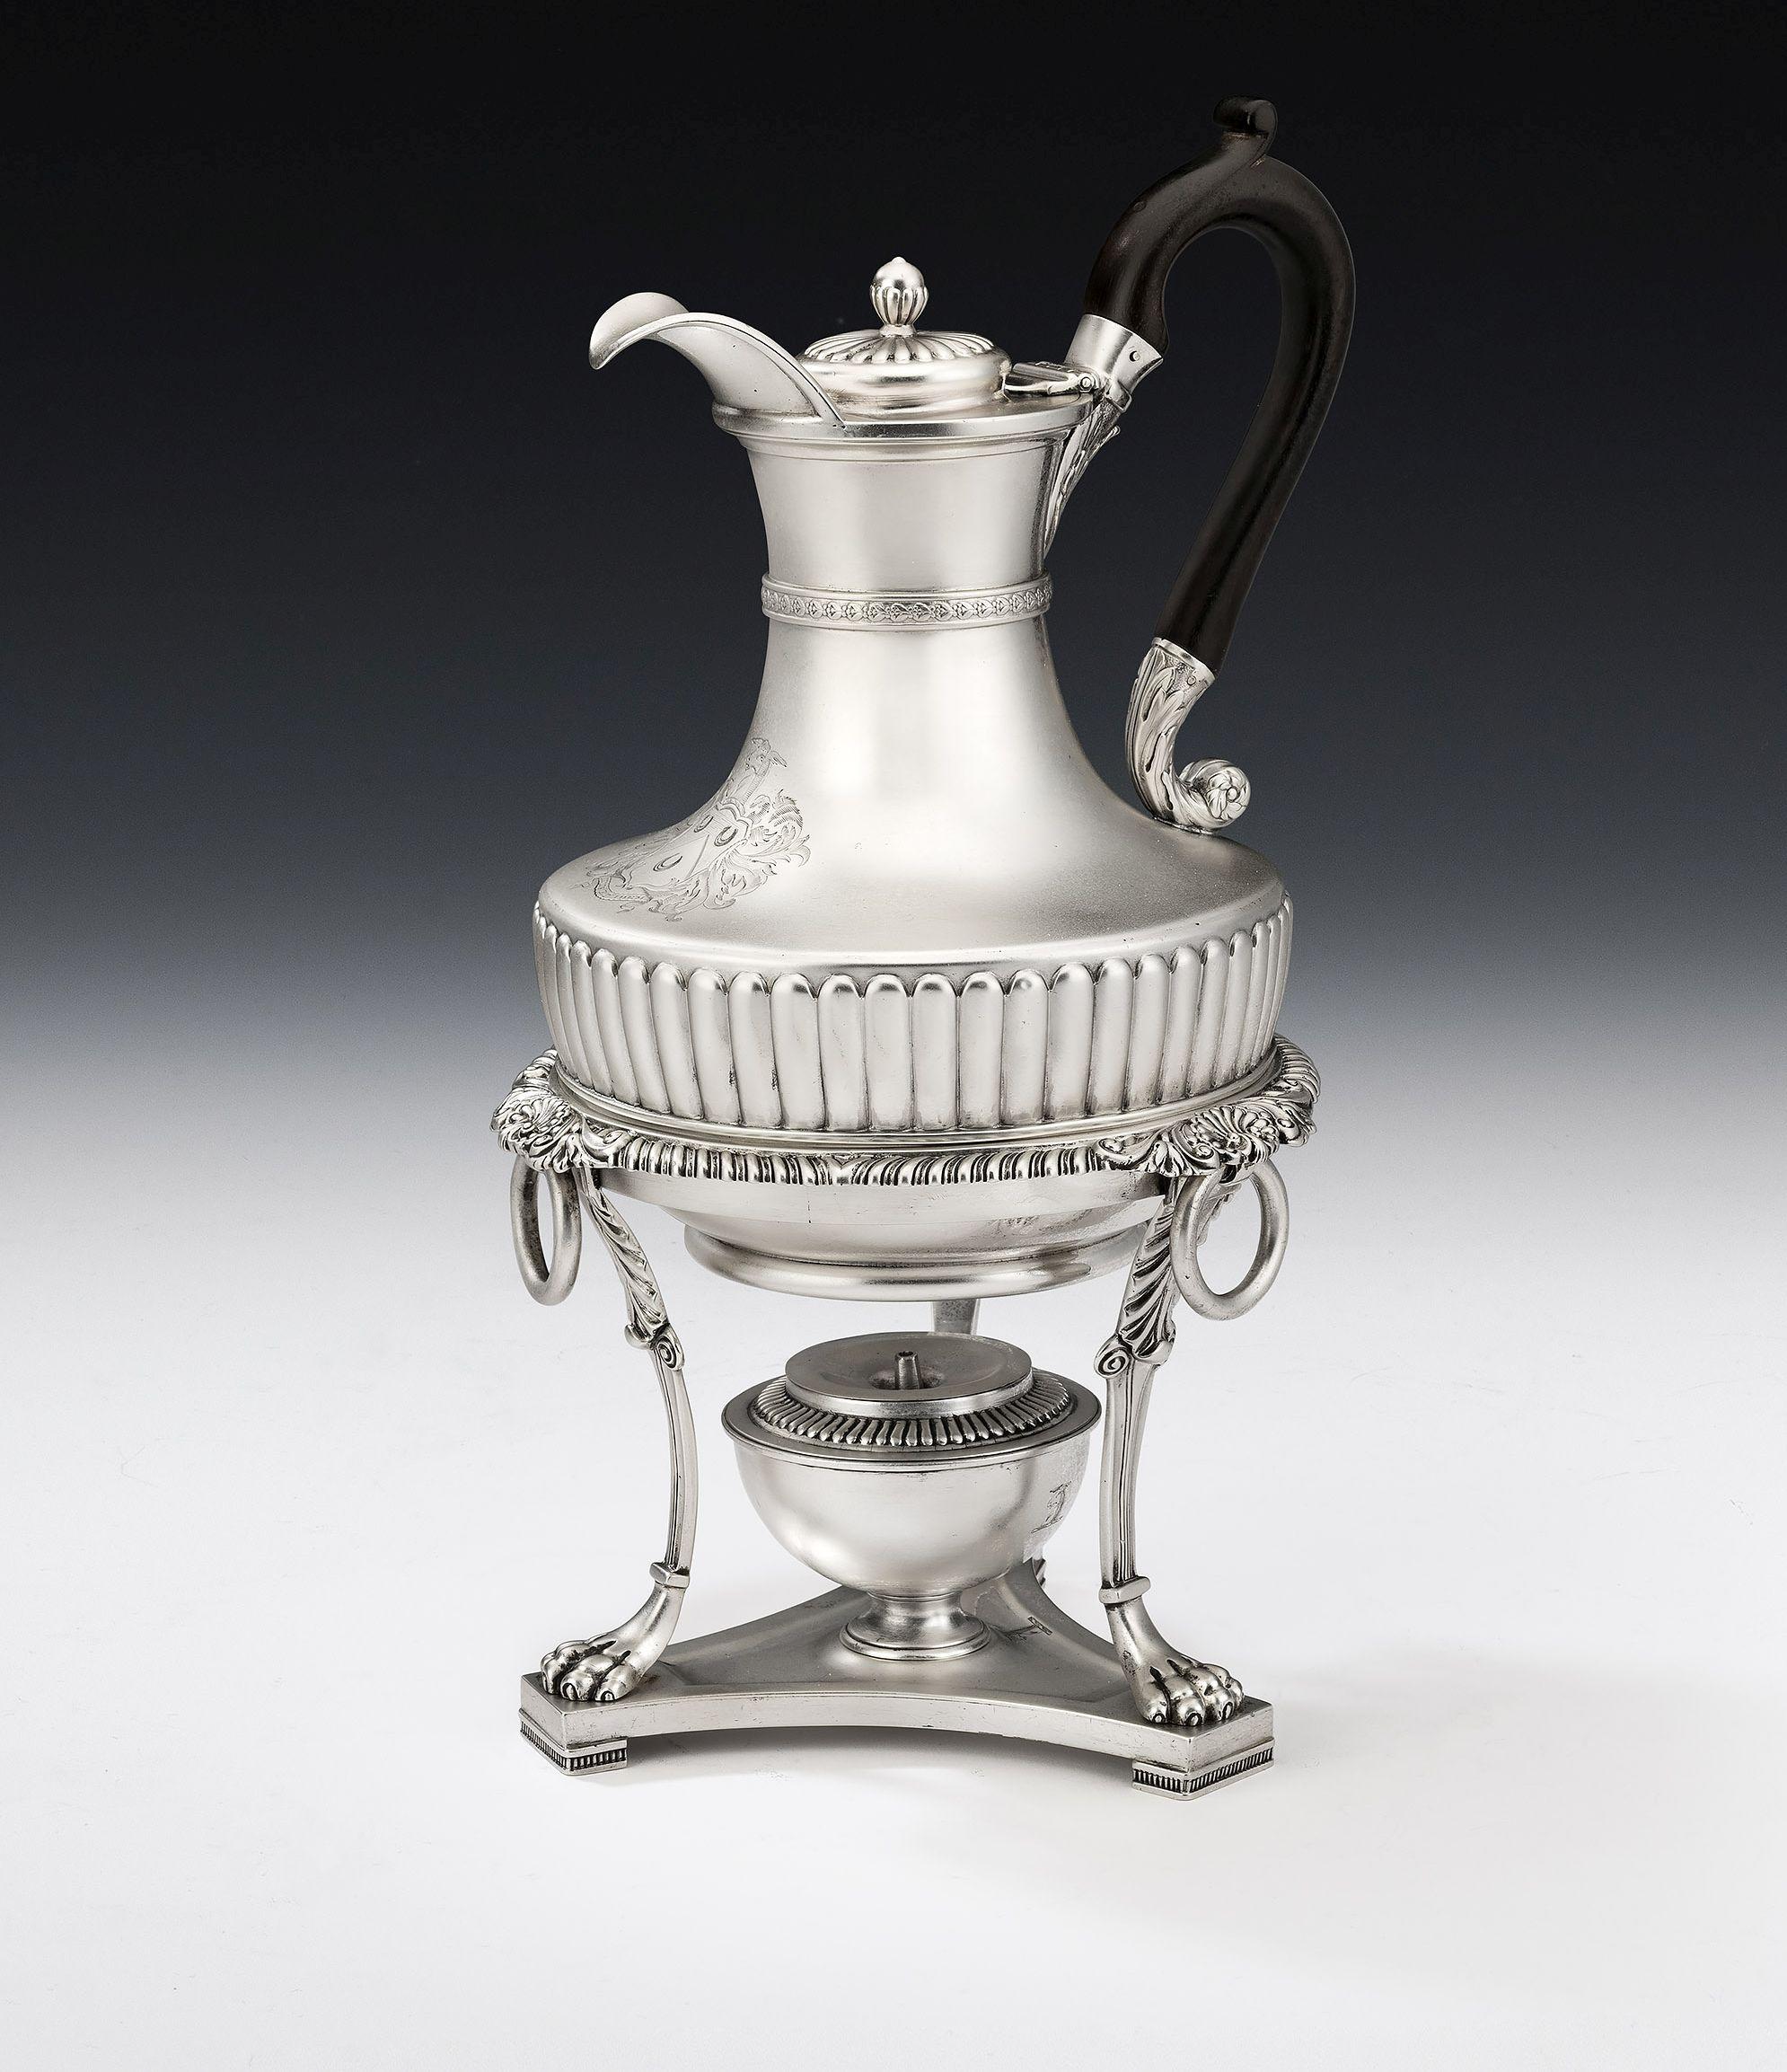 This important jug is modelled in the Regency Classical revival style. The main body has a pyriform body decorated with an unusual wide lobed band, which acts as a projecting ledge to support the jug on its Stand. A band of fruiting berries